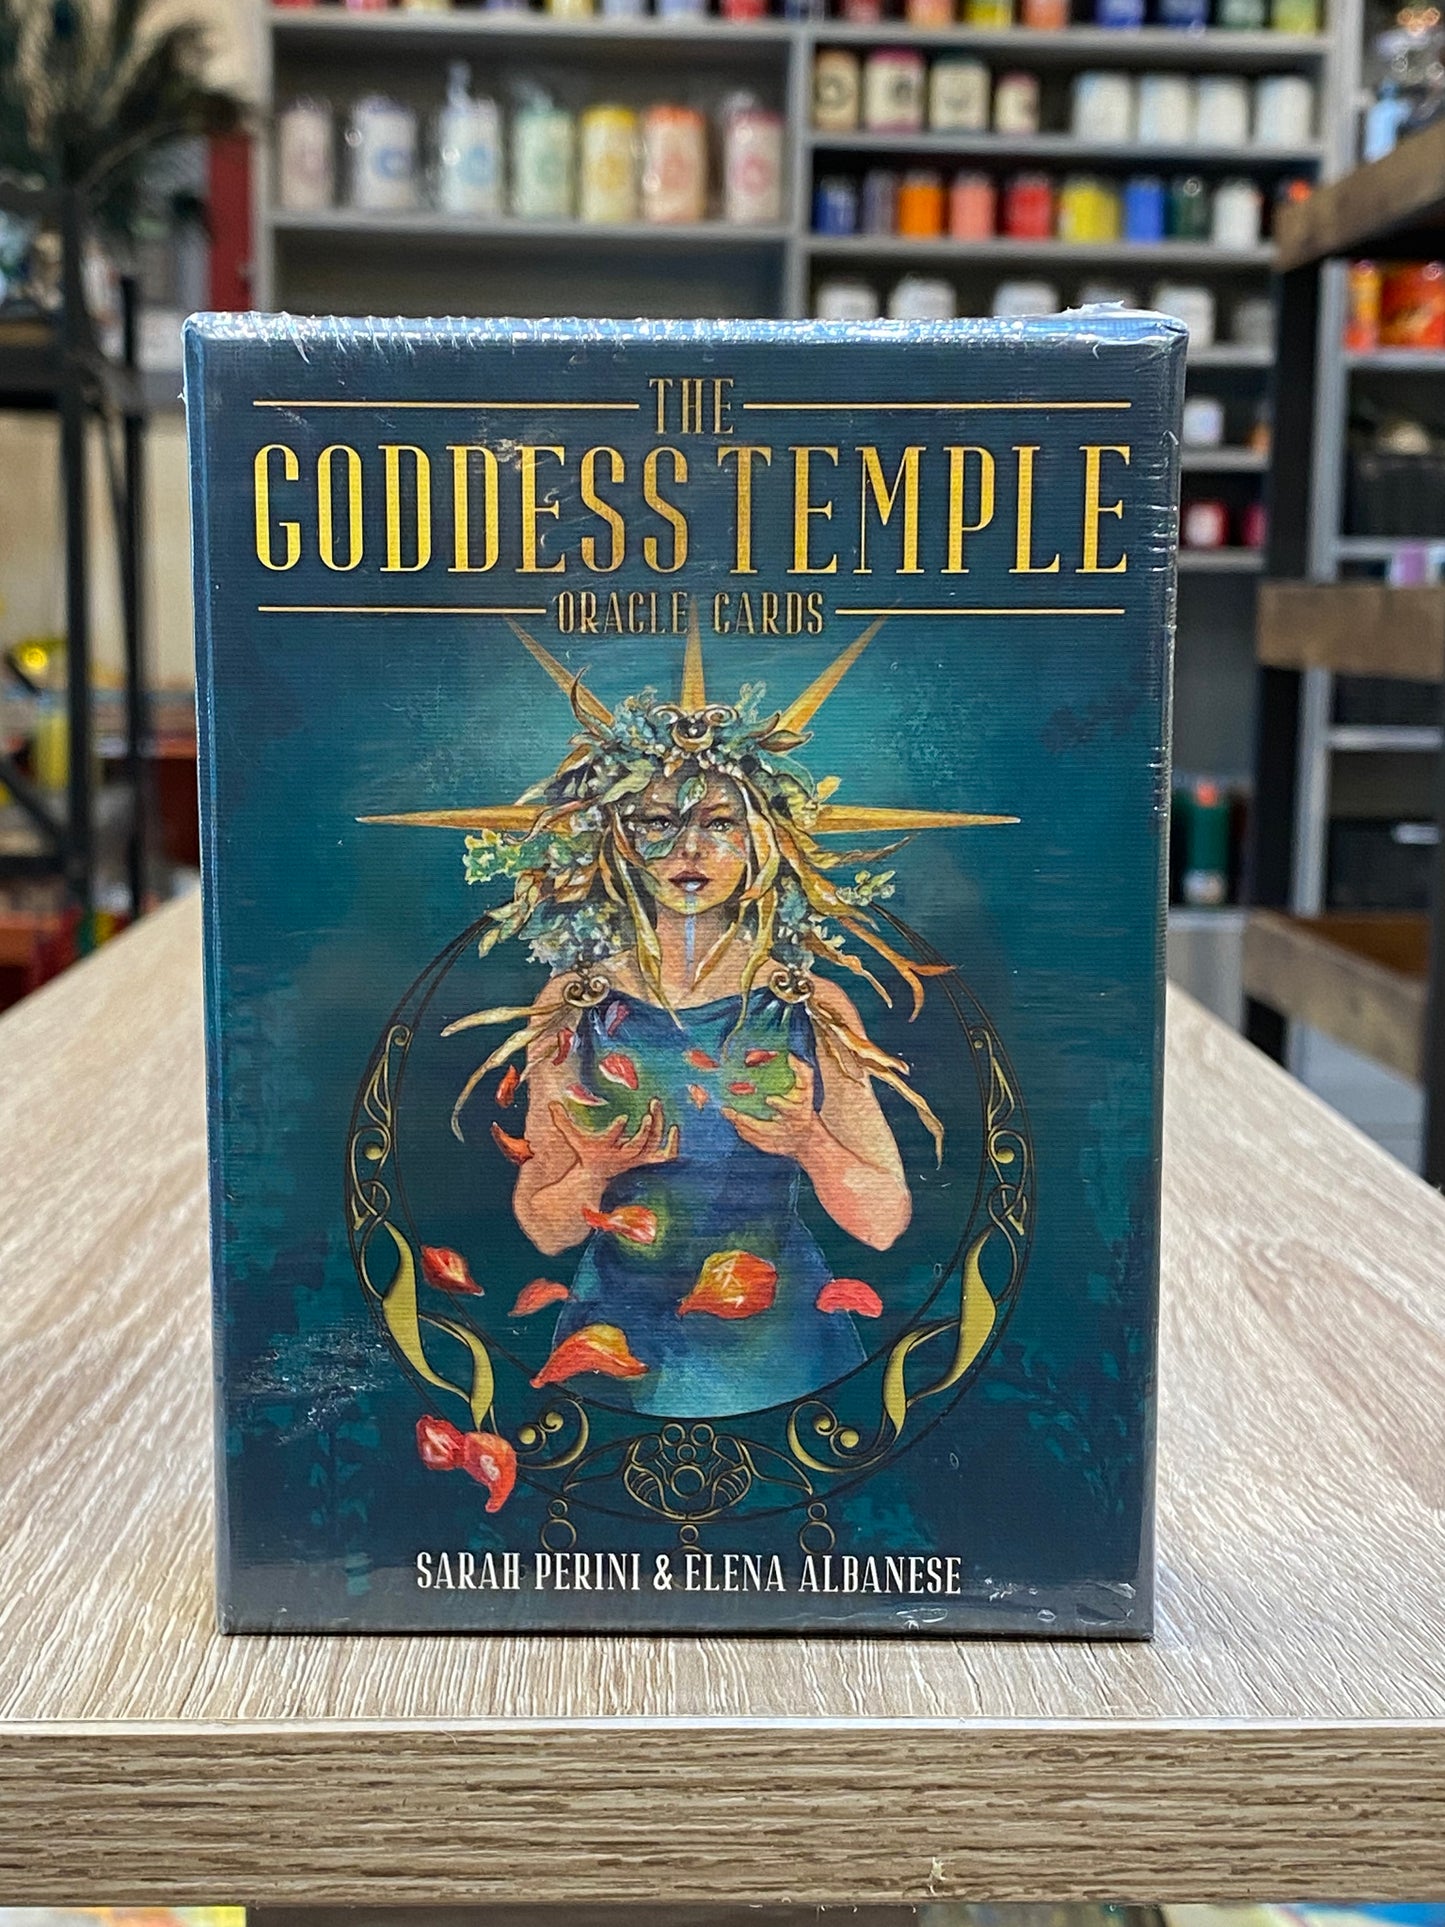 The Goddess Temple Oracle Cards by Sarah Perini, Elena Albanese